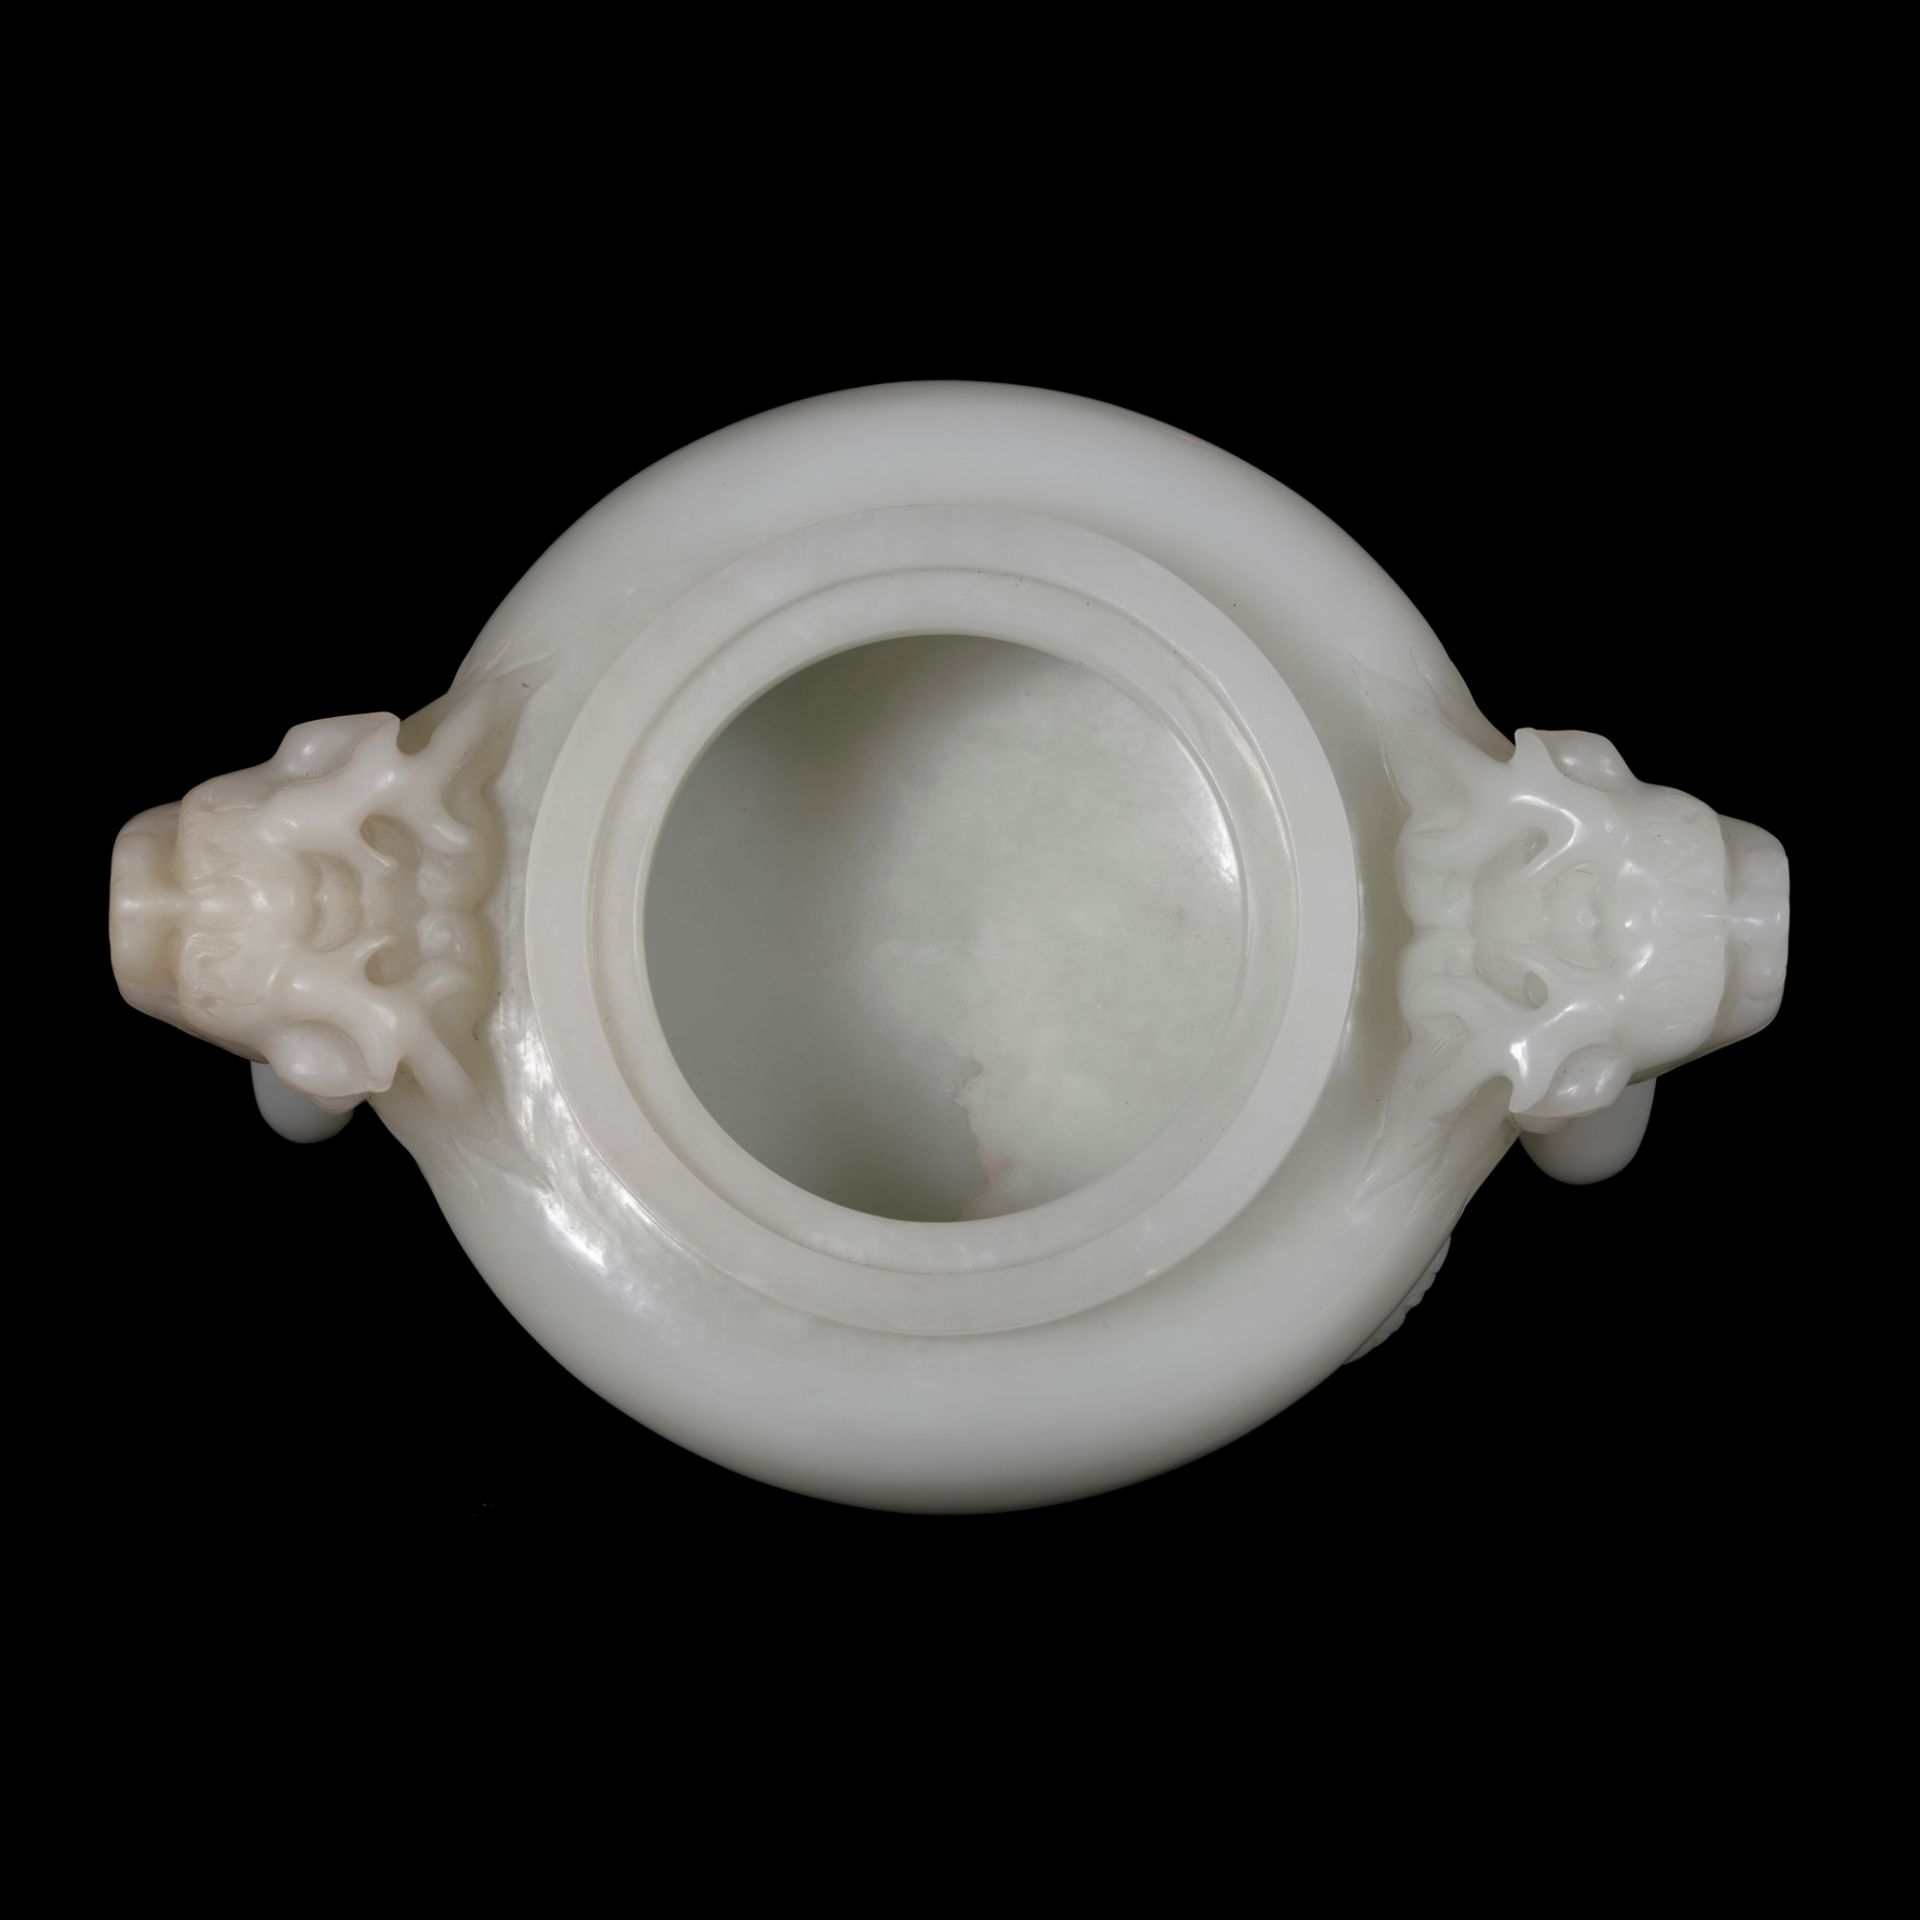 A FINE WHITE TRIP POD CENSER AND COVER, China, Qing dynasty, 19th century - Image 8 of 10